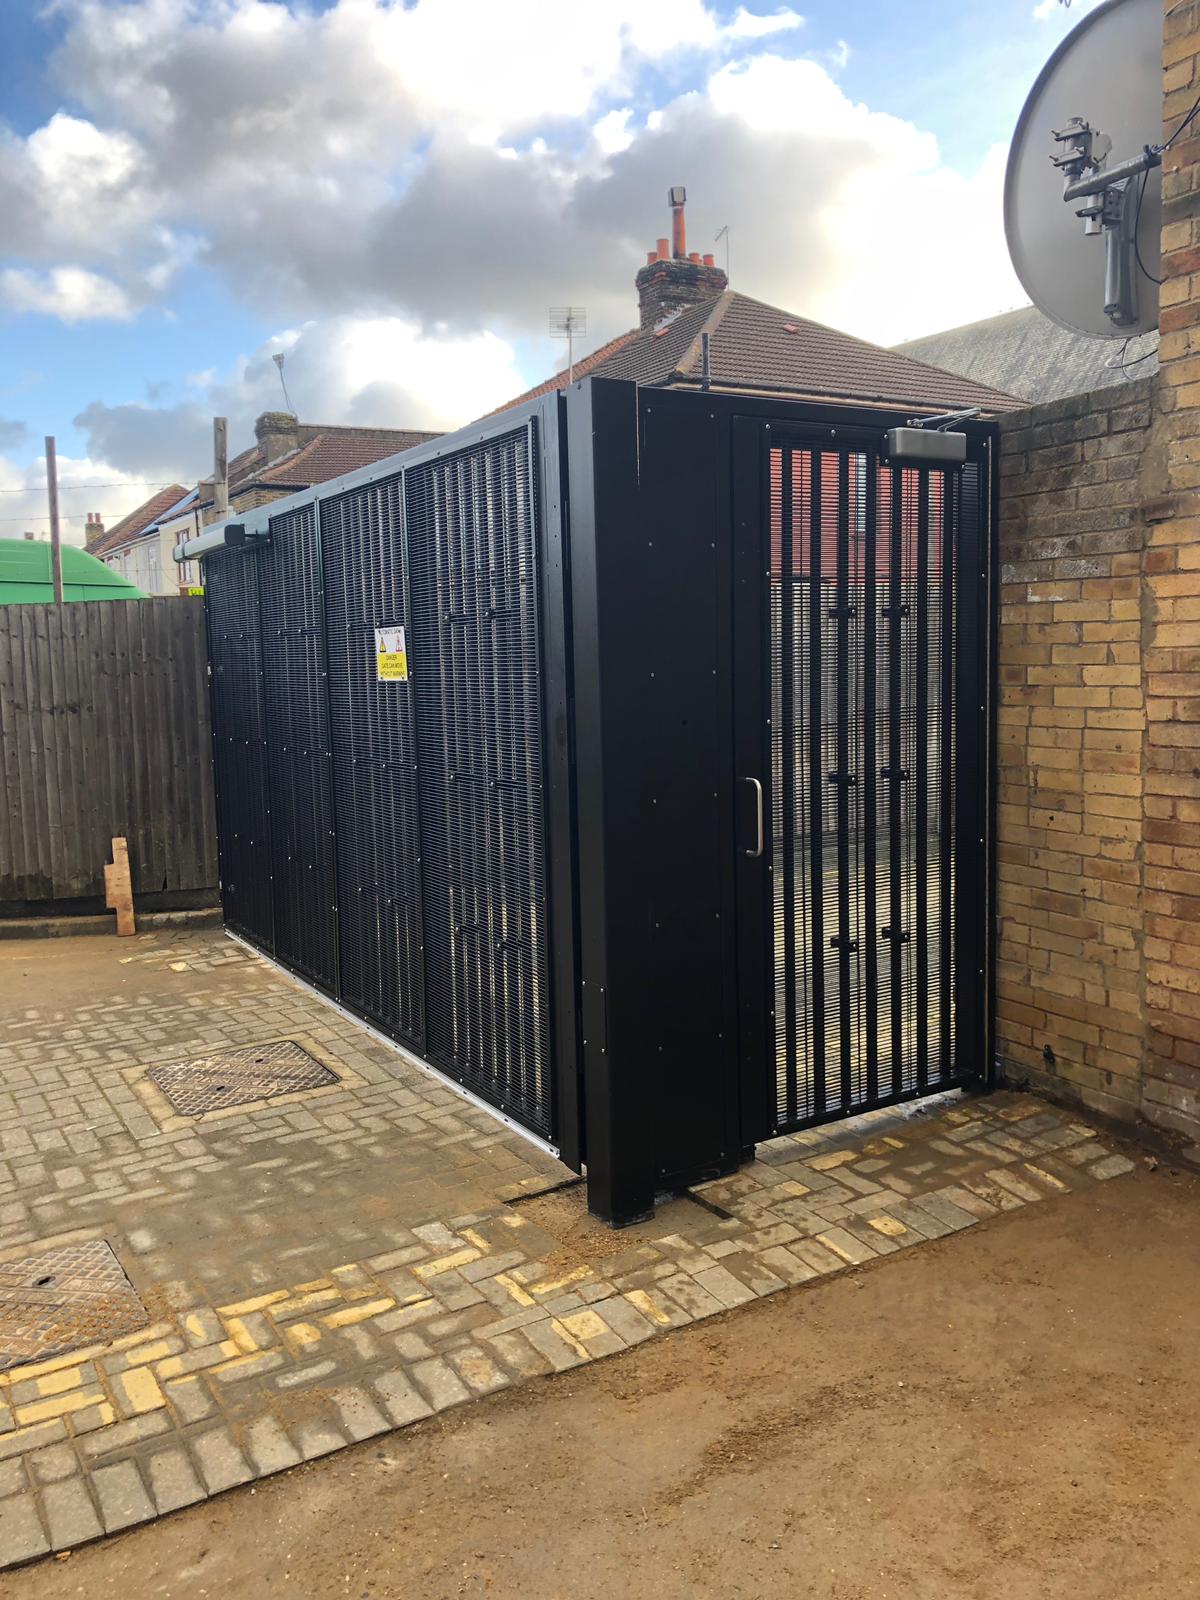 VEHICLE AND PEDESTRIAN LPS1175 SR2 STEEL GATES ALSO TESTED TO SR3 STANDARD